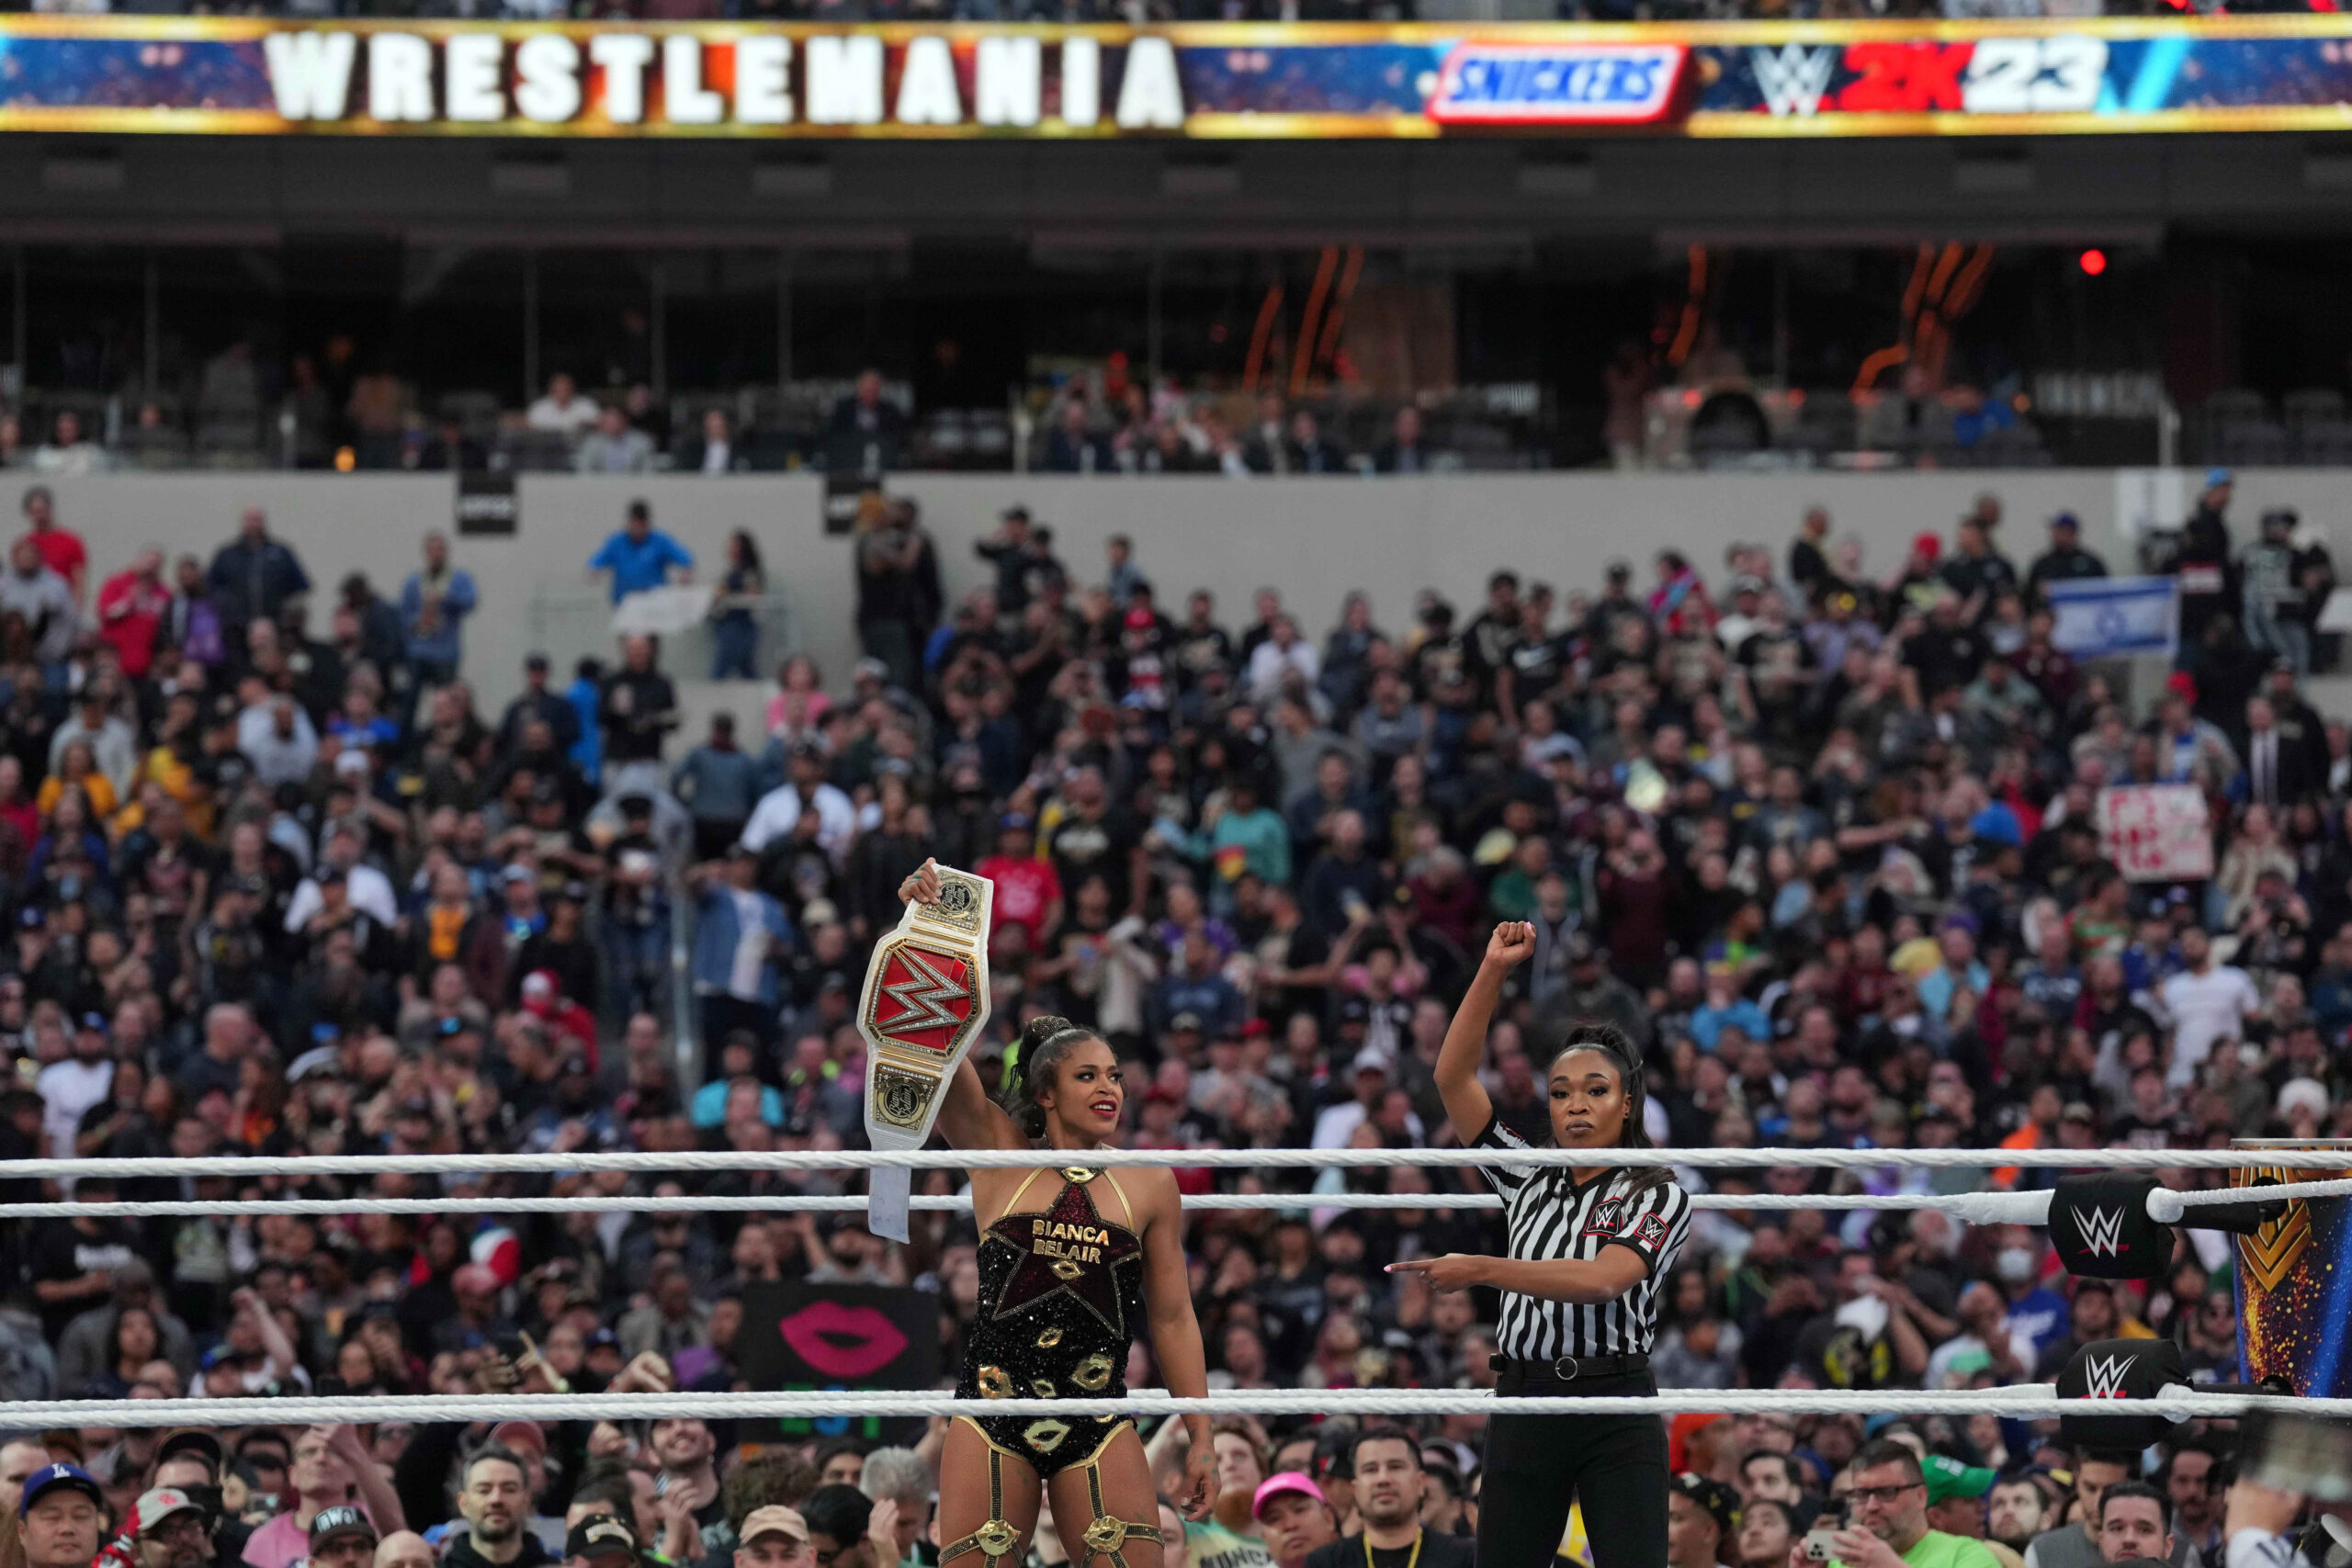 WrestleMania 39 results: Bianca Belair is pushed to the limit but retains against Asuka